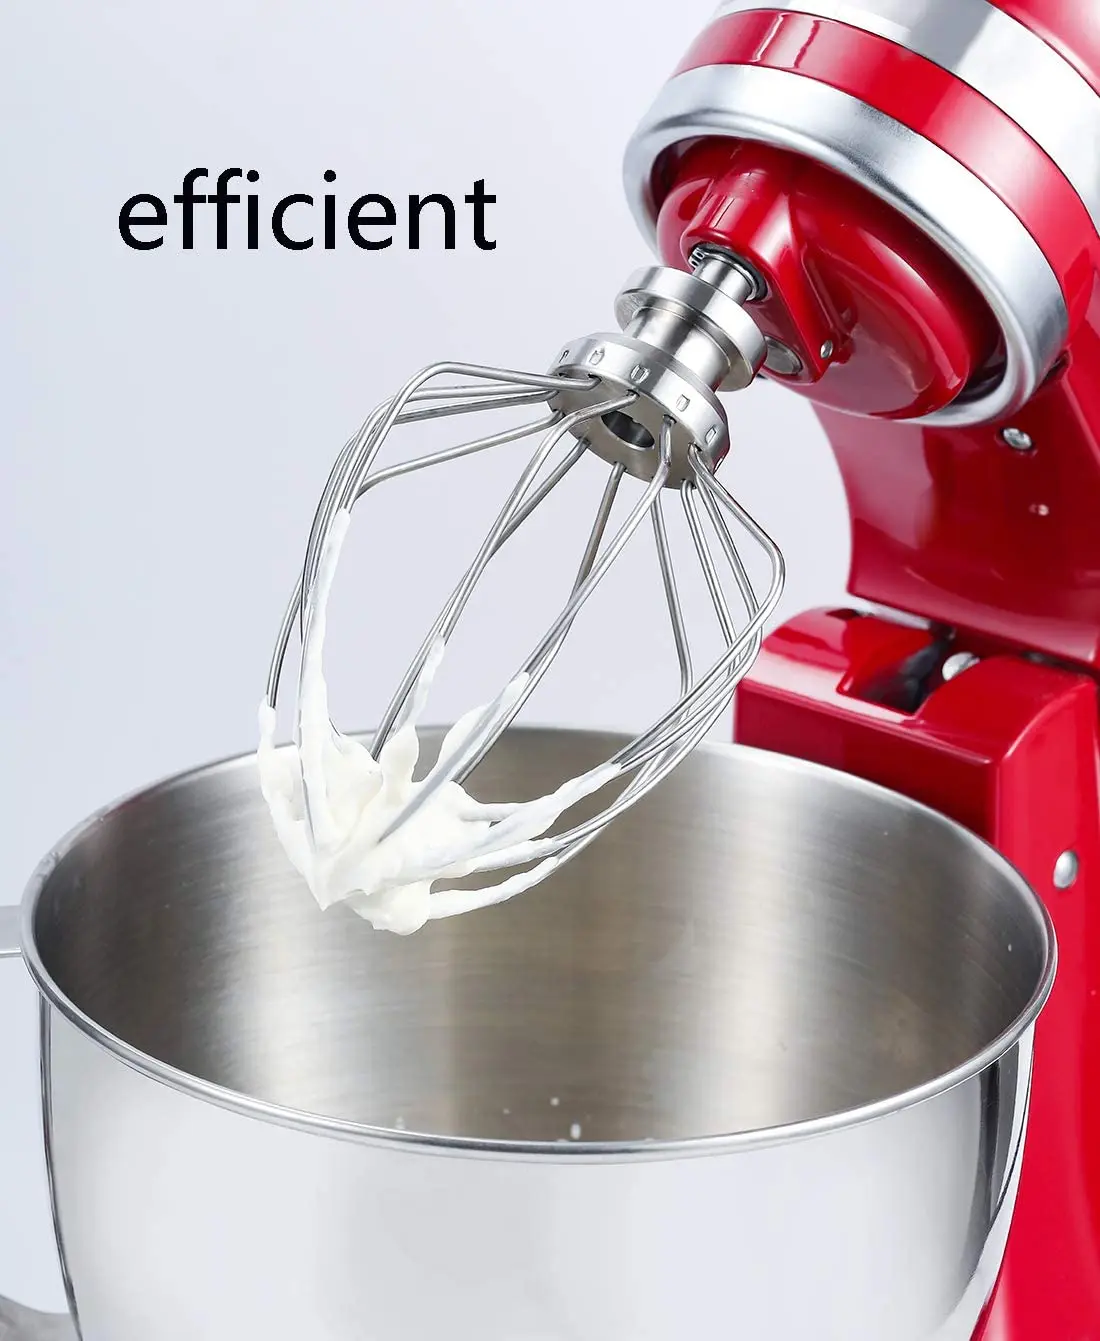 K45WW 6-Wire Whip Attachment For Tilt-Head Stand Mixer, Stainless Steel. Egg Heavy Cream Beater, Cakes Mayonnaise Whisk Mixer ac